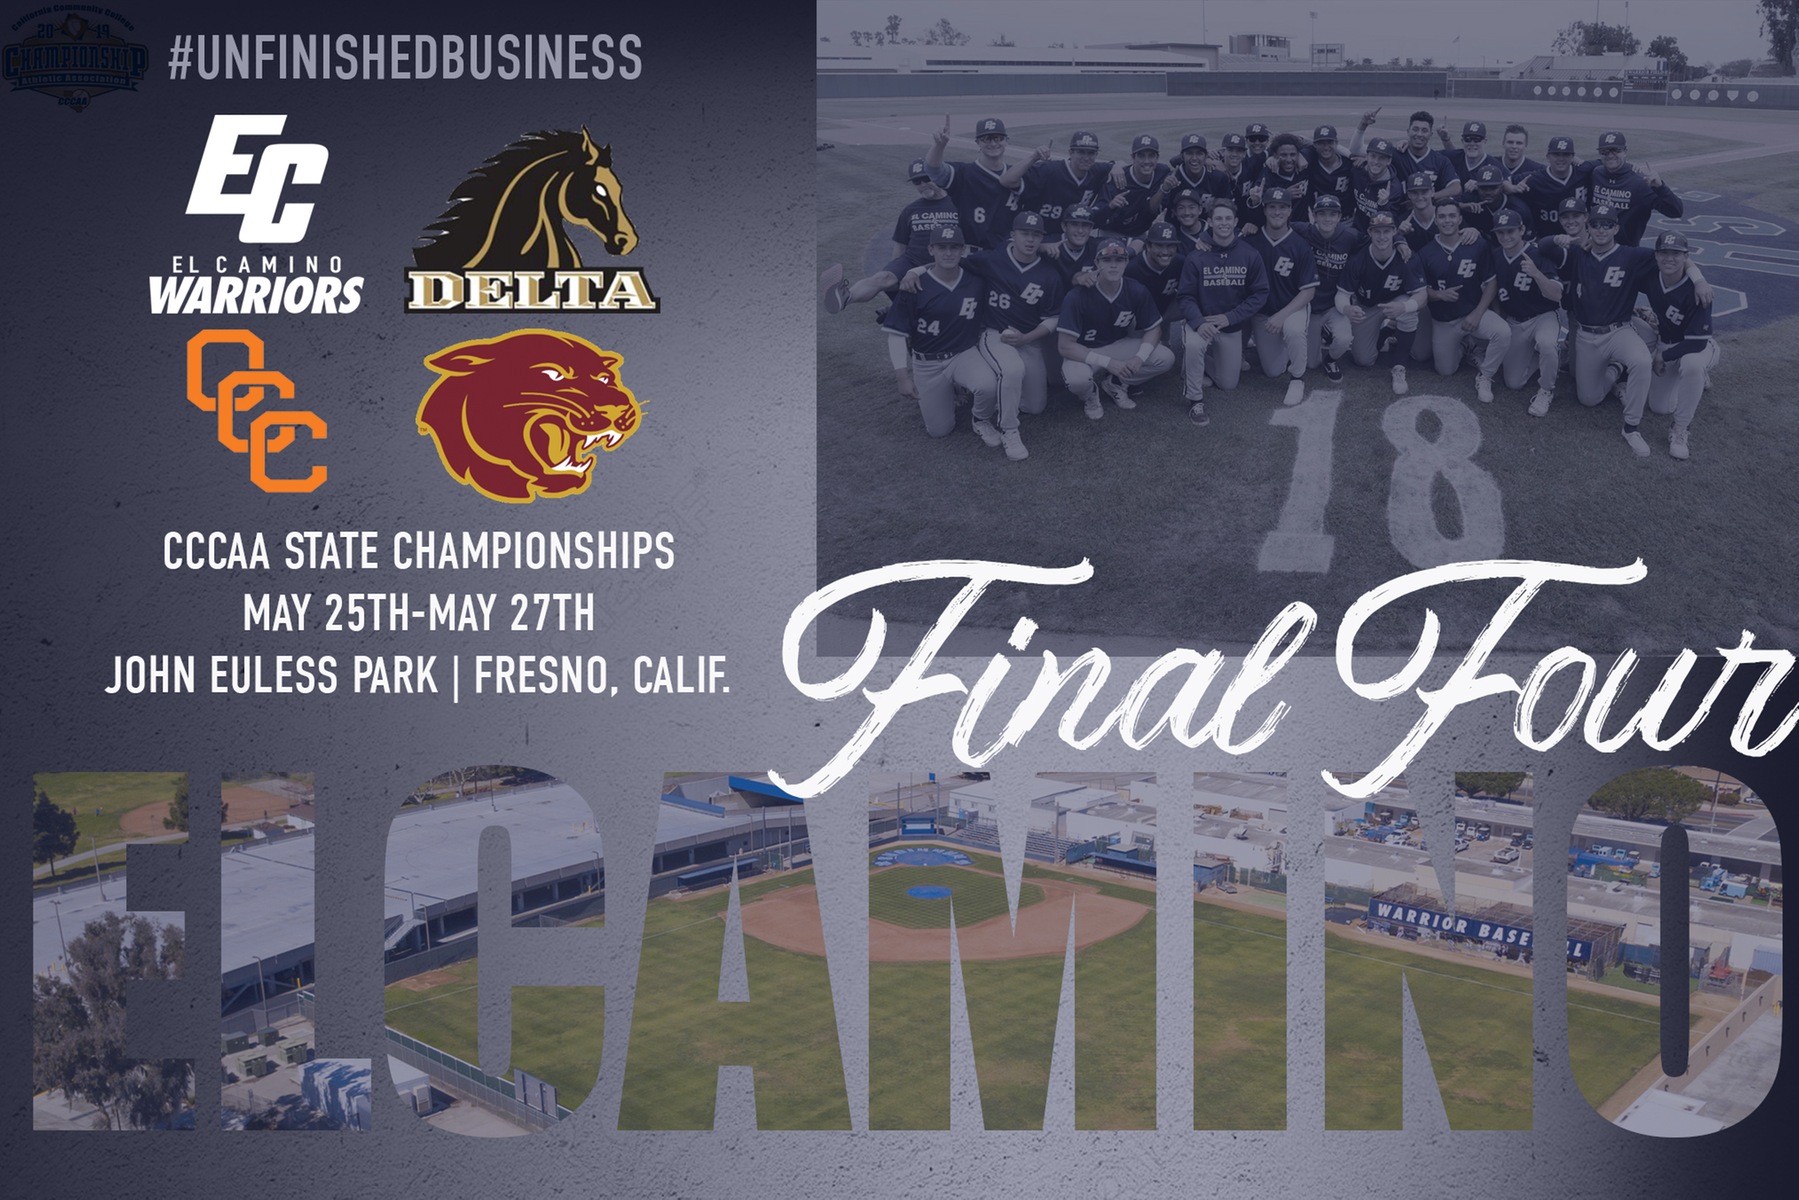 Baseball Heads to Fresno For CCAAA State Championships